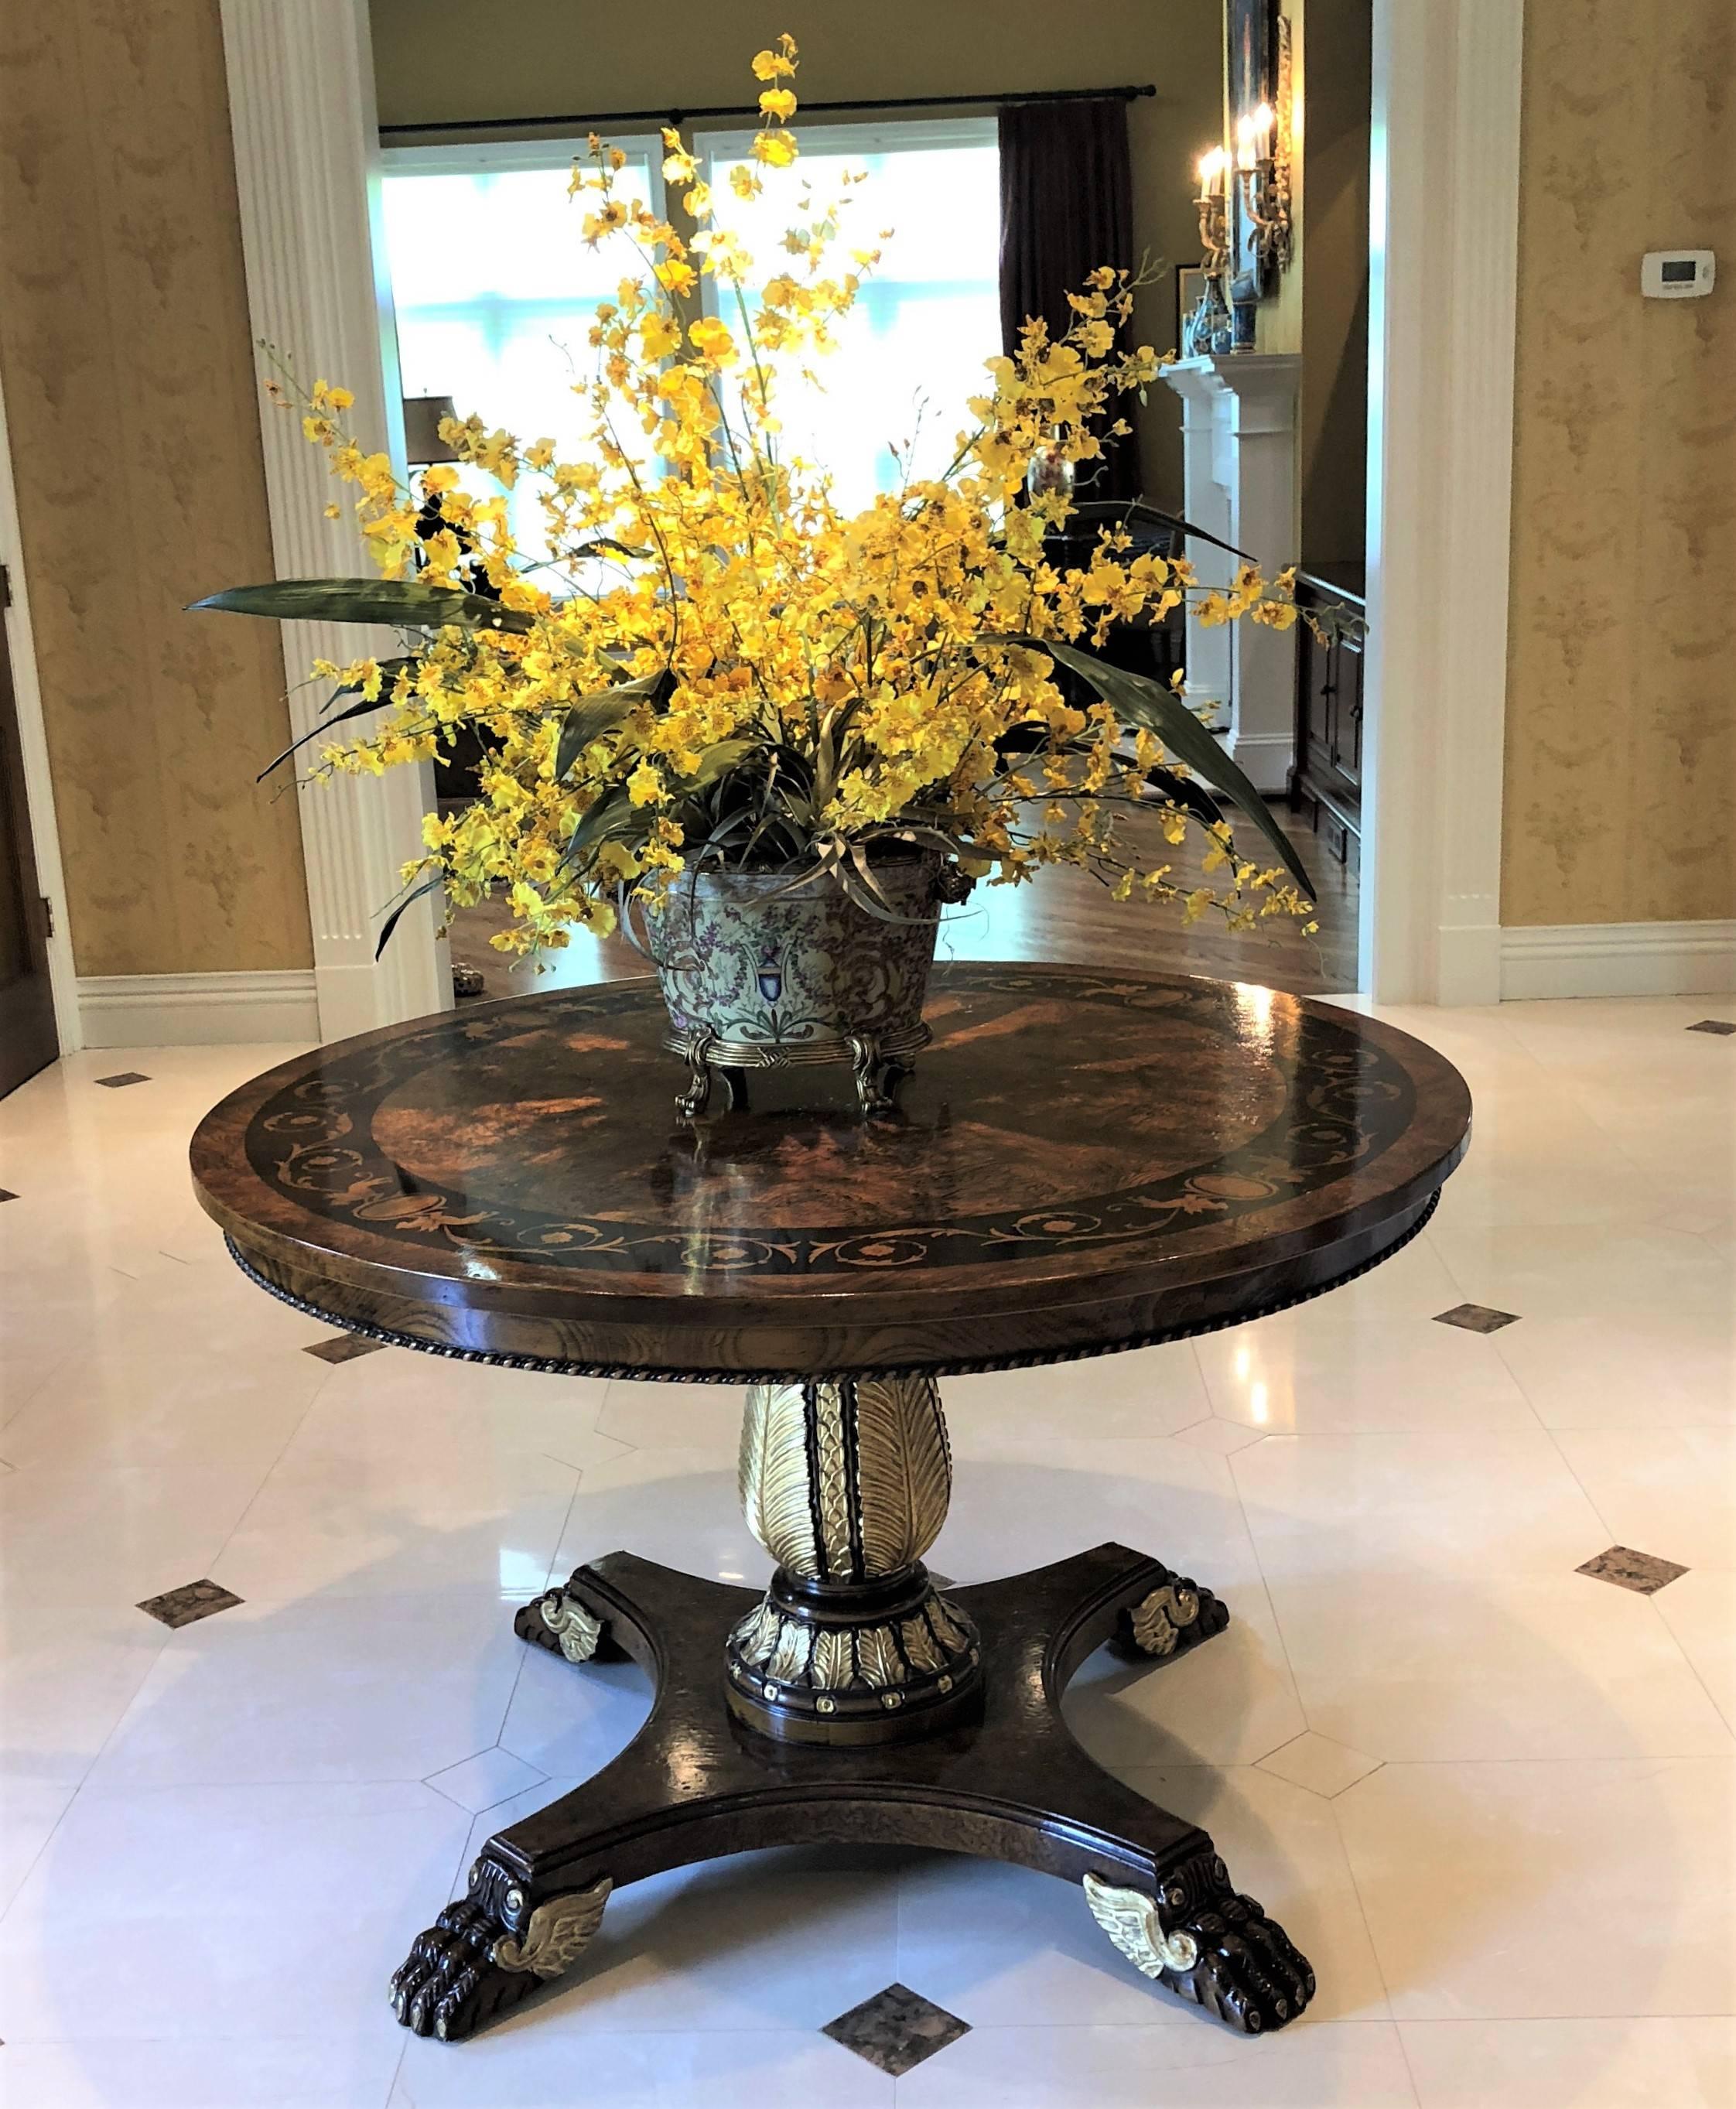 Mid-Century Modern Regency Neoclassical Style Inlaid Foyer Top Round Centre Table Francesco Molon